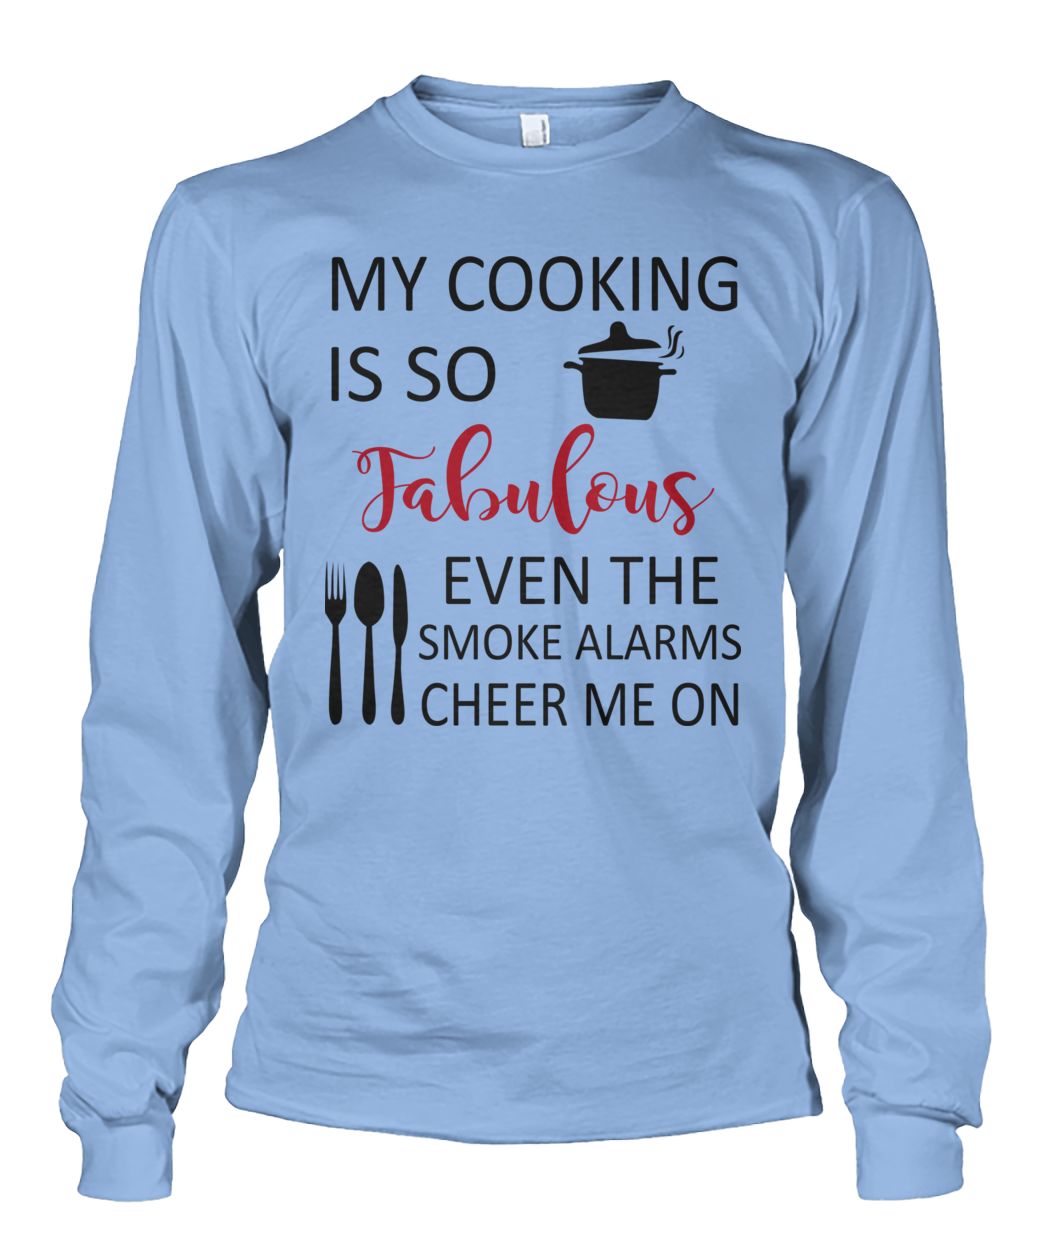 My cooking is so fabulous even the smoke alarms cheer me on unisex long sleeve